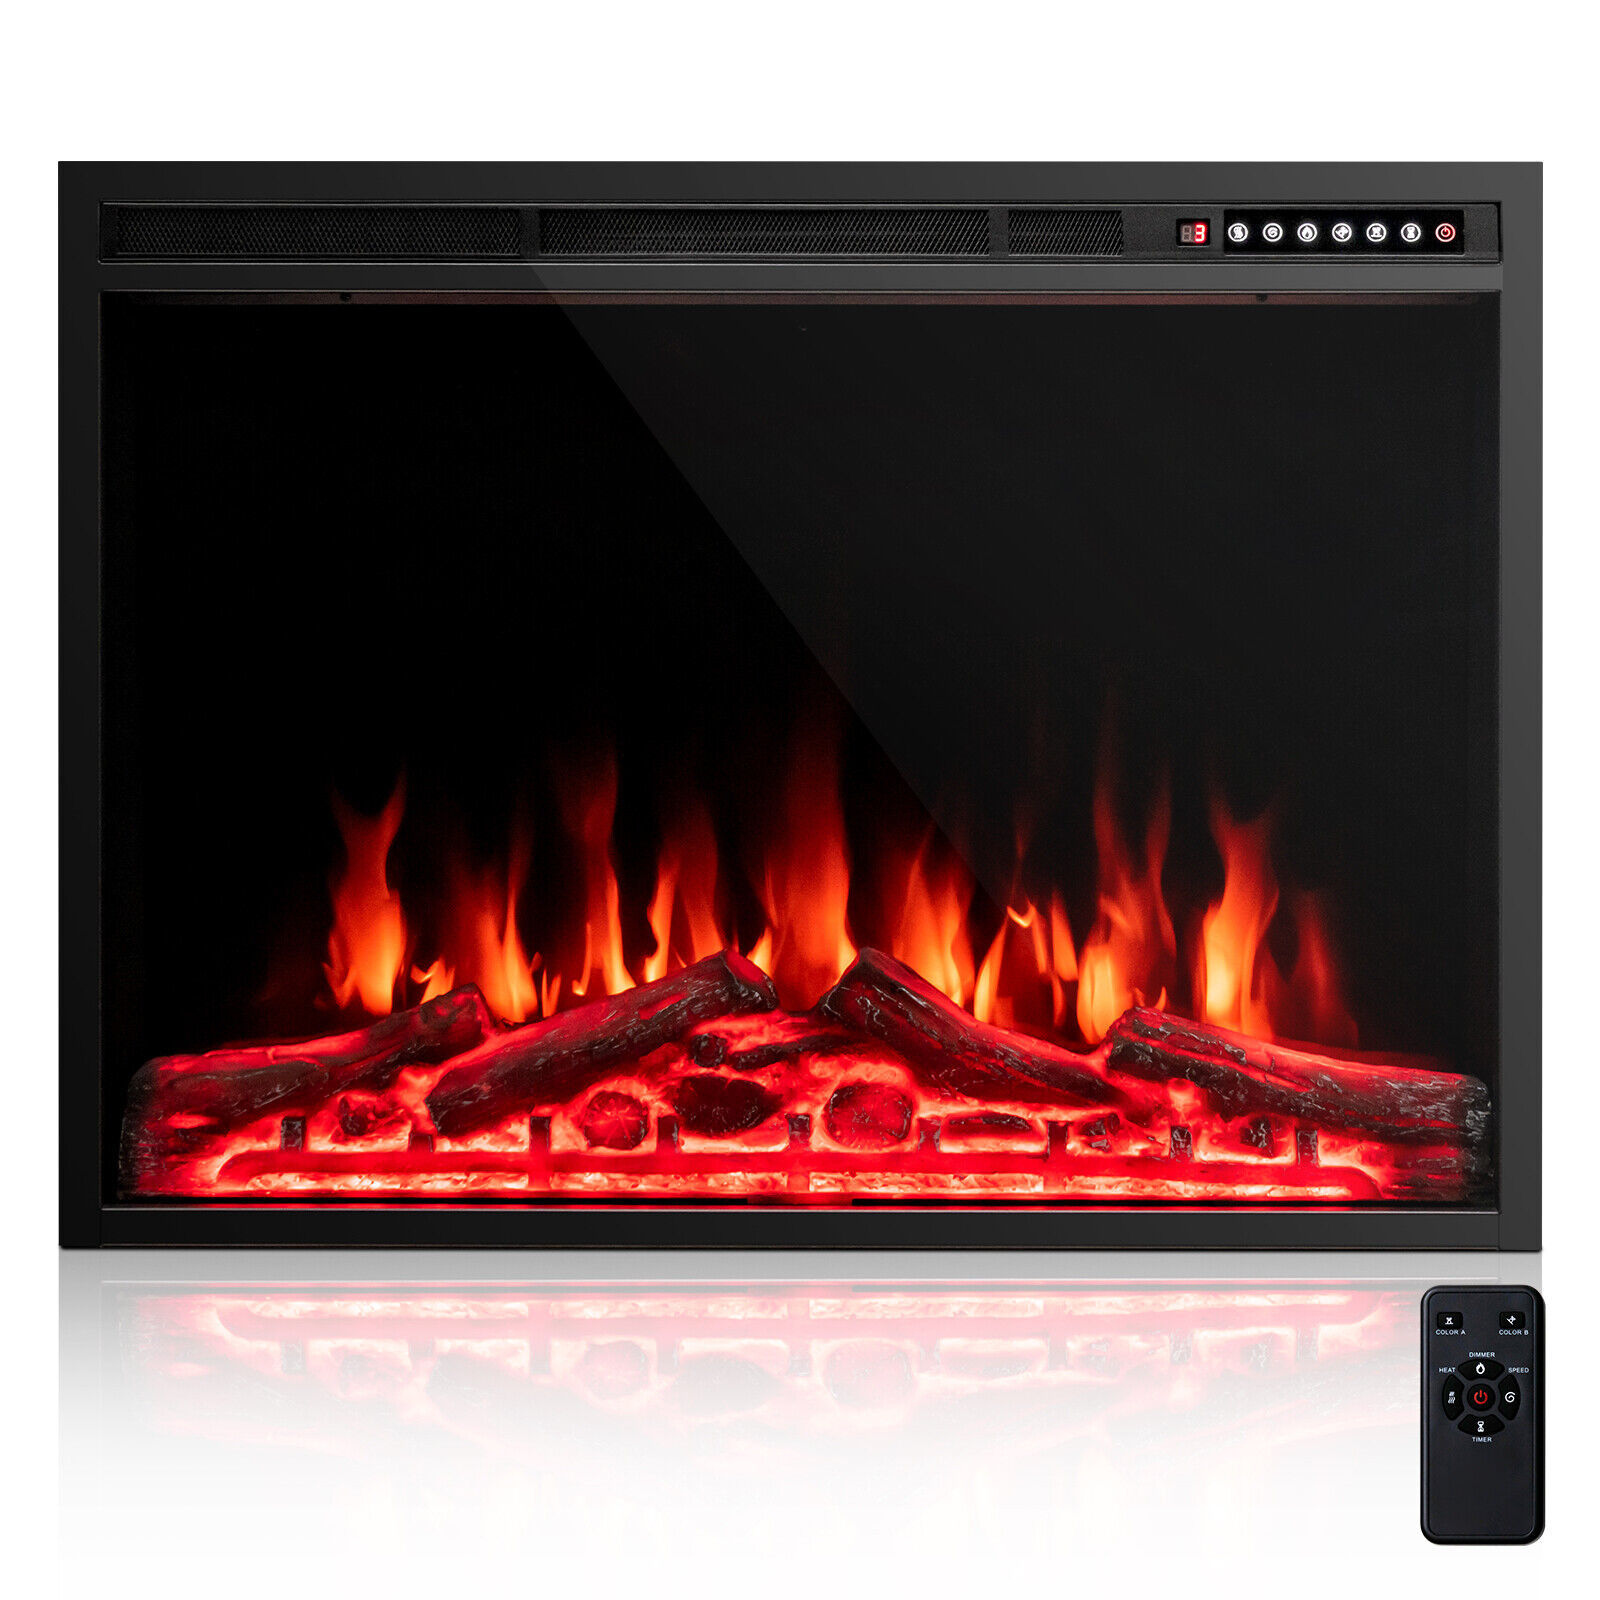 Primary image for Electric 37" Fireplace Insert Heater Log Flame Effect w/ Remote Control 1500W